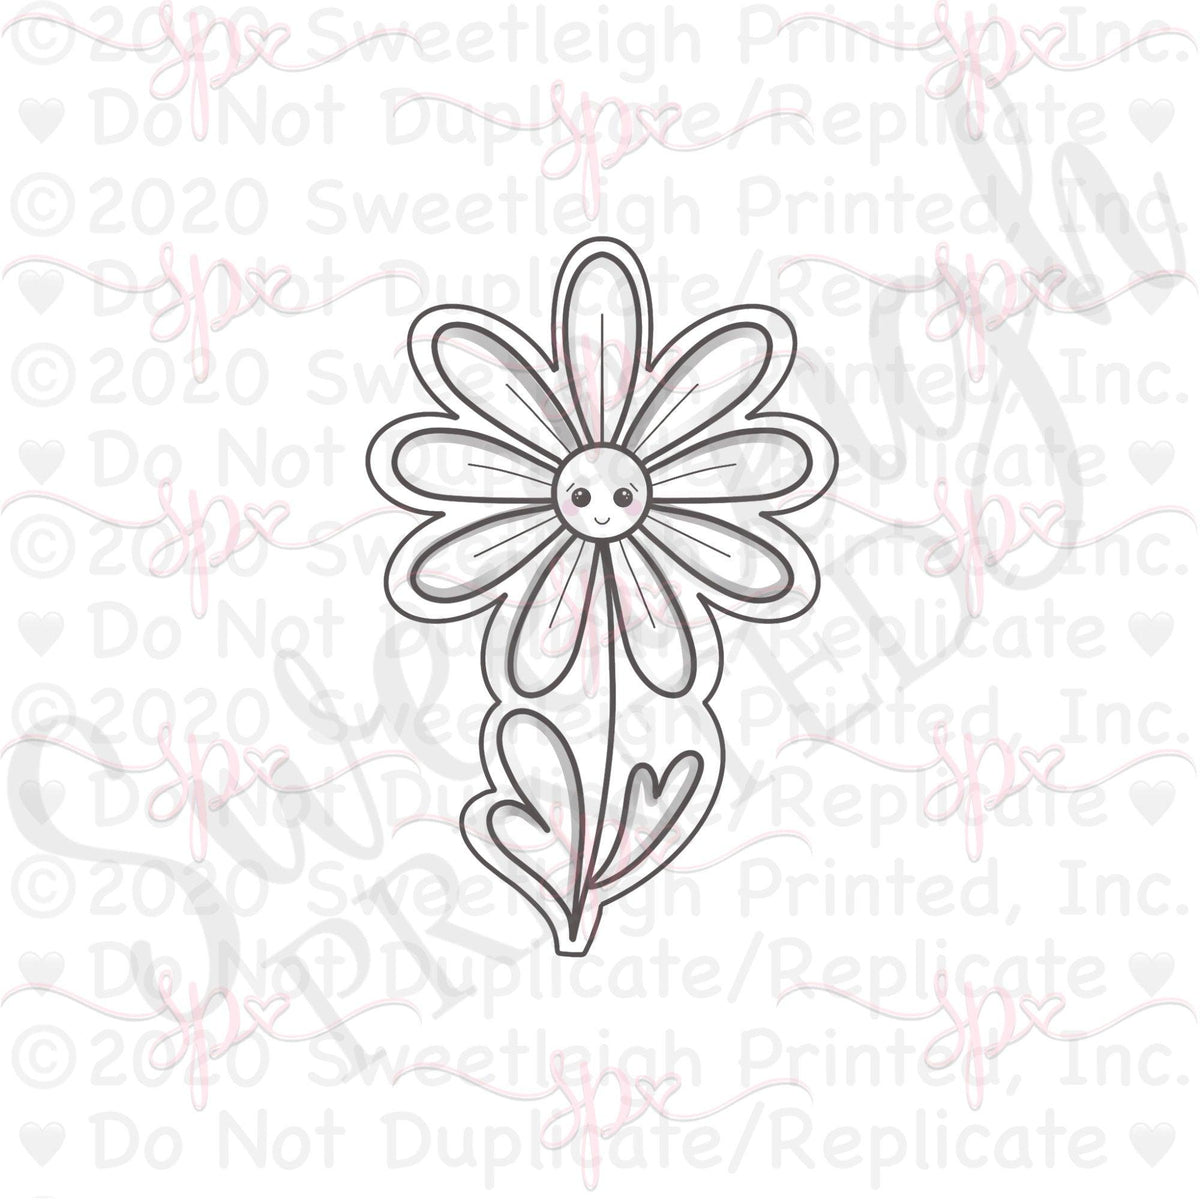 Valentine&#39;s Daisy Cookie Cutter - Sweetleigh 